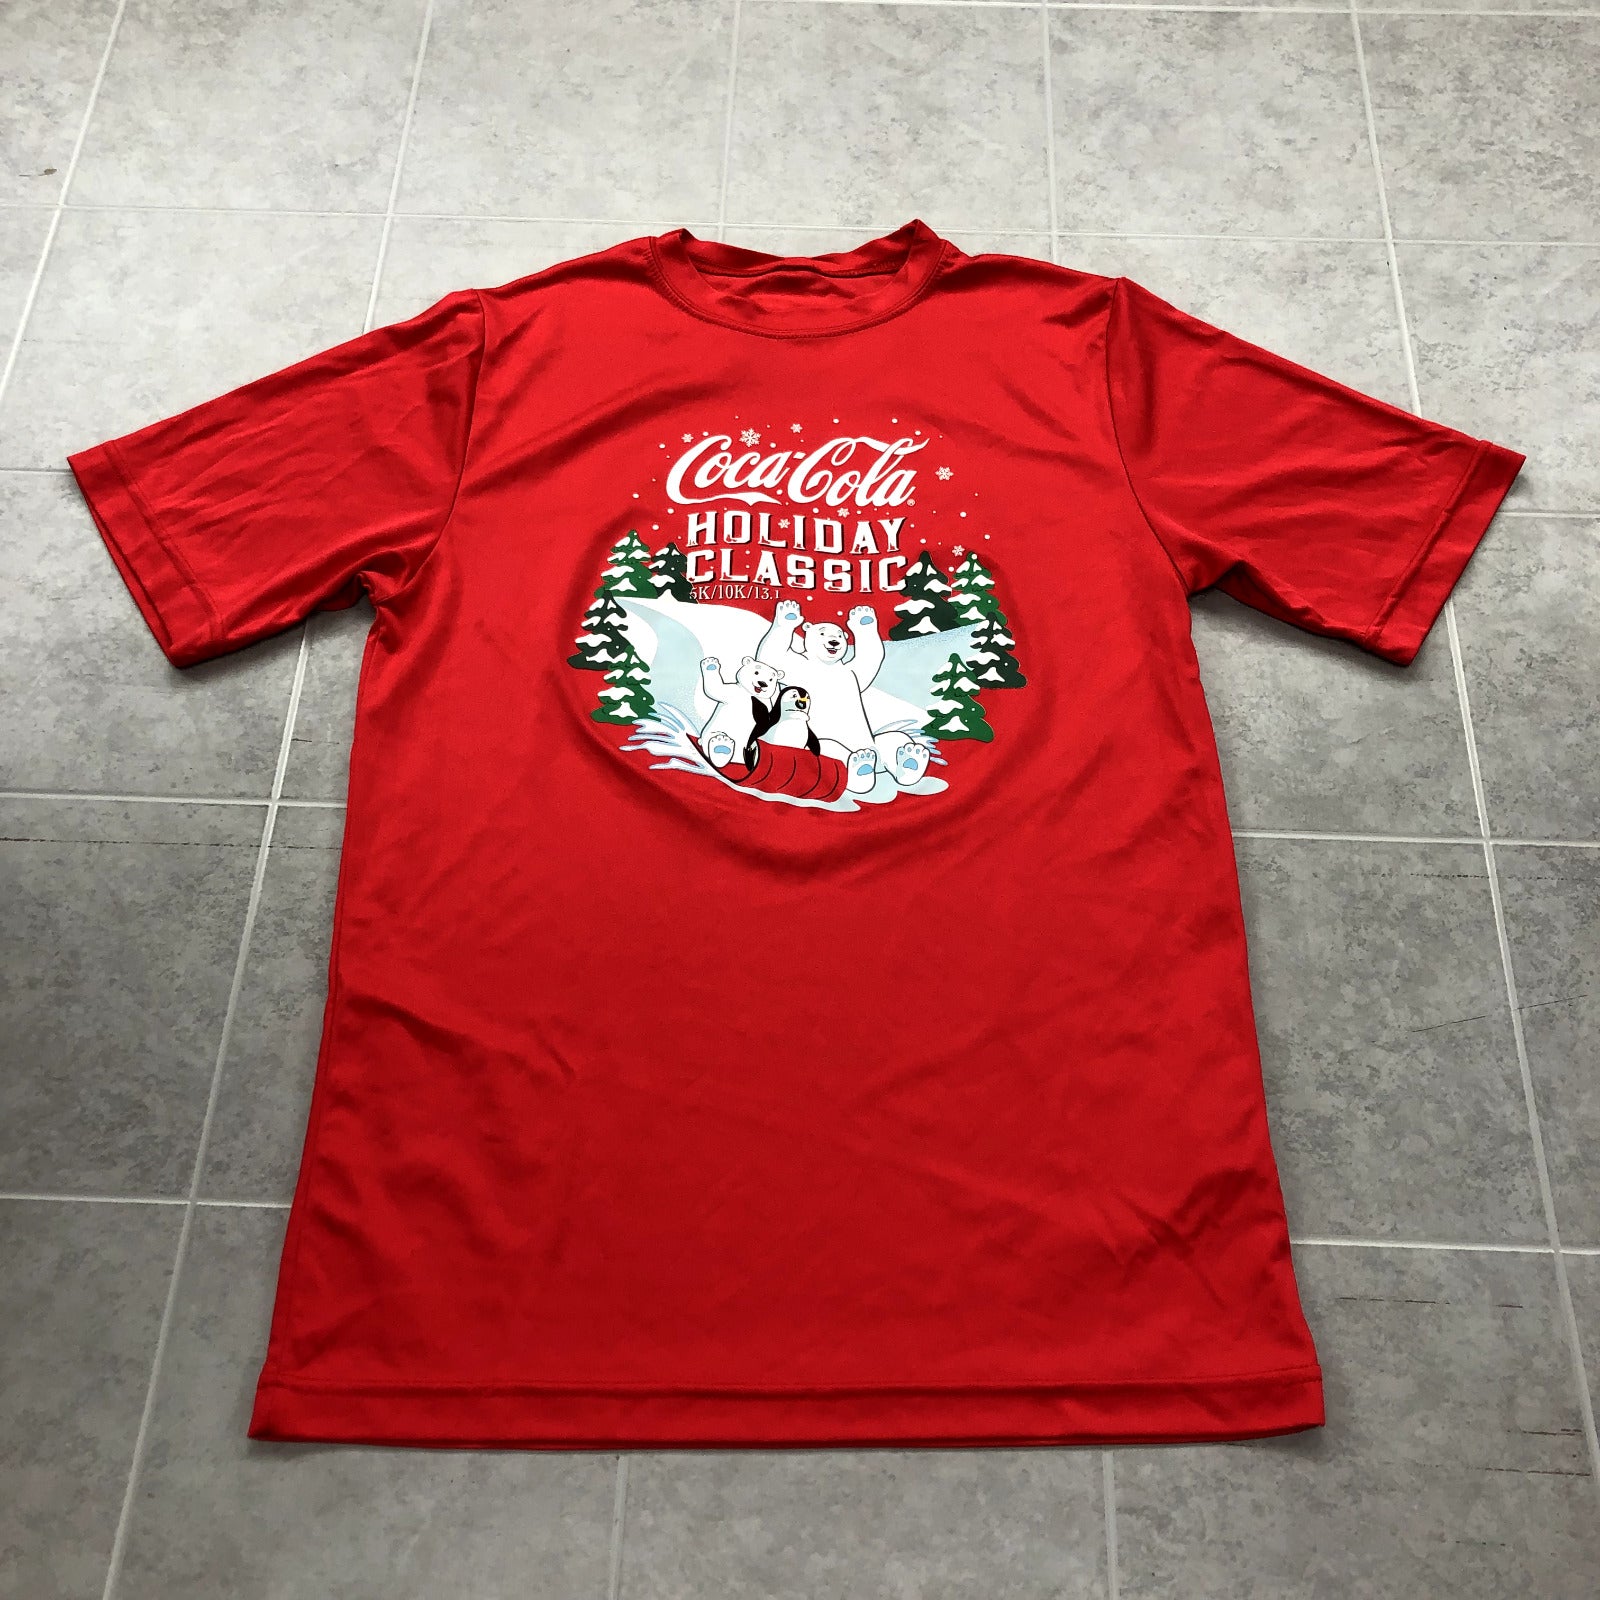 Coca Cola Red Short Sleeve Graphic Holiday Logo Active T-shirt Adult Size S